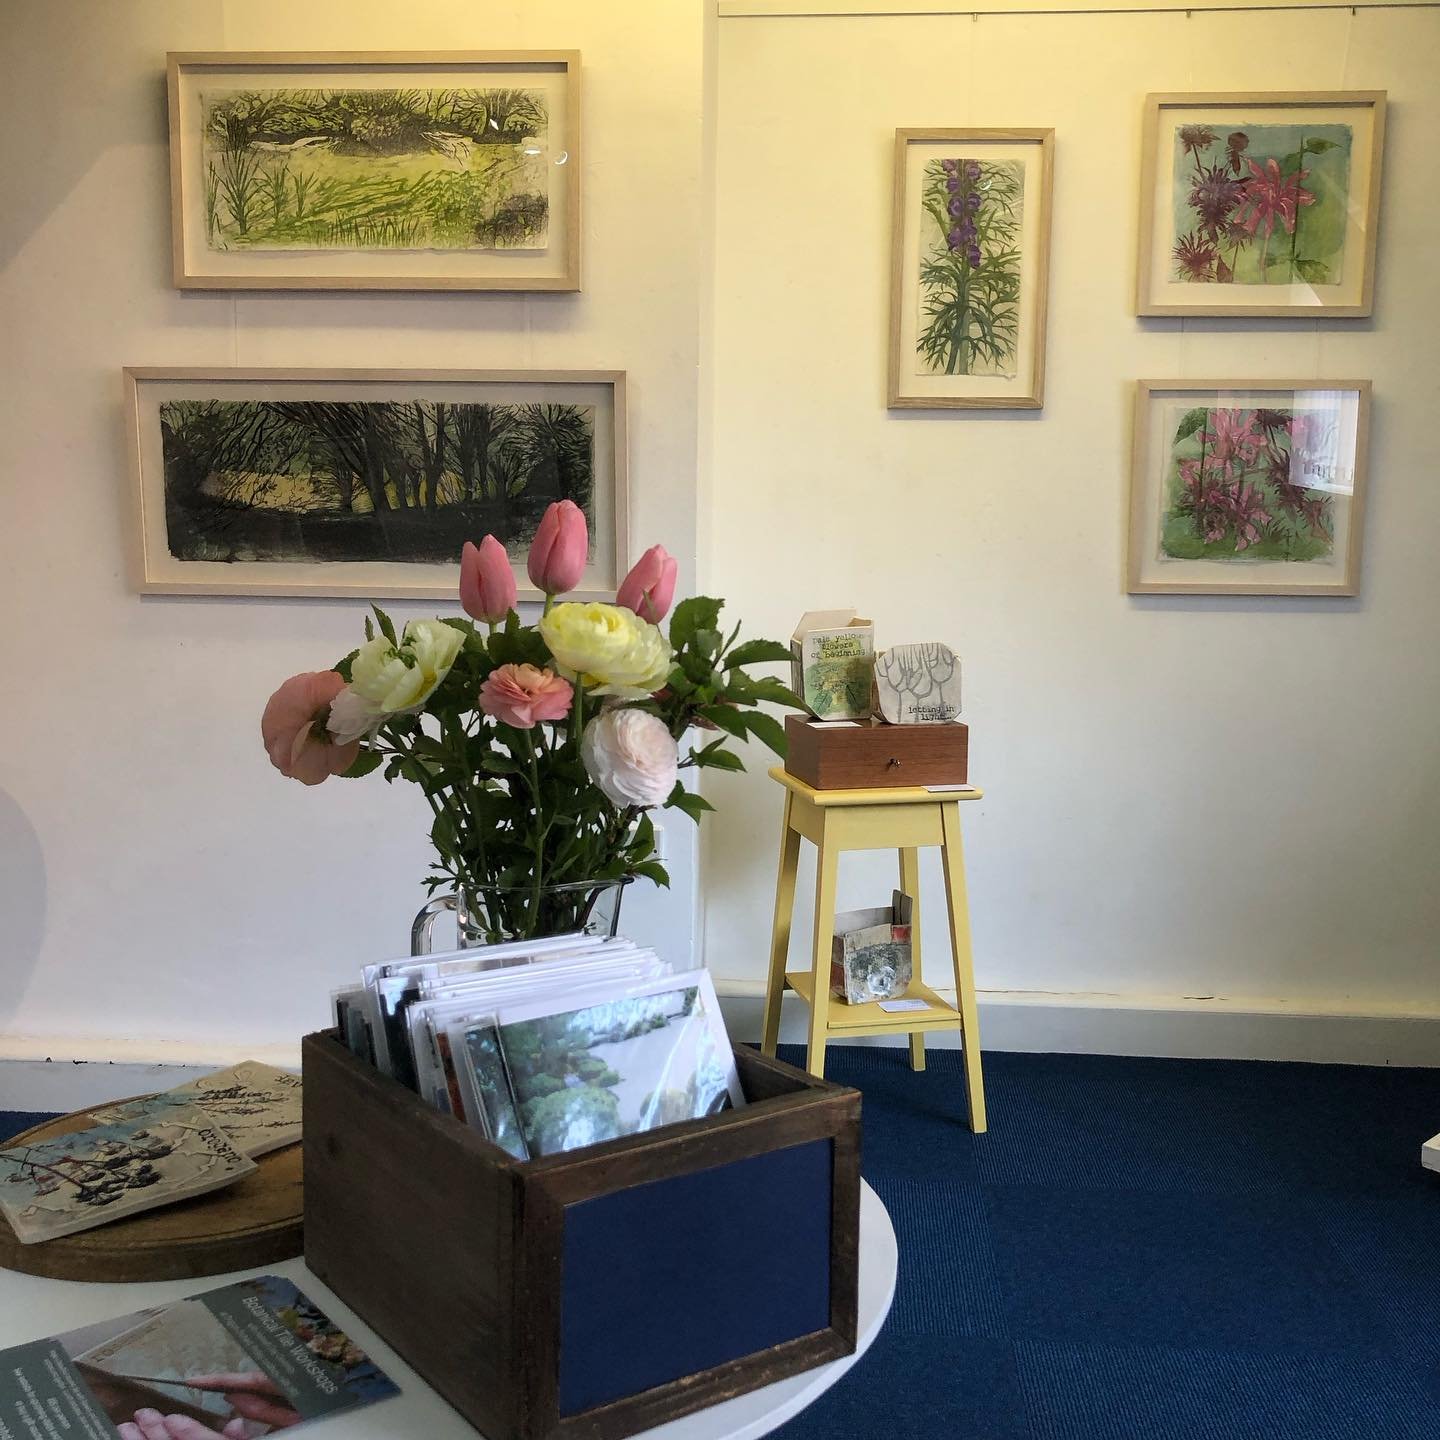 Enjoying welcoming visitors at Weavers Gallery, Church St, Ledbury - 6 local women artists showing their work for a week. Do call by! We&rsquo;re open 10-4 every day til next Sunday @creativebreakshfds #womenartist #ledbury #